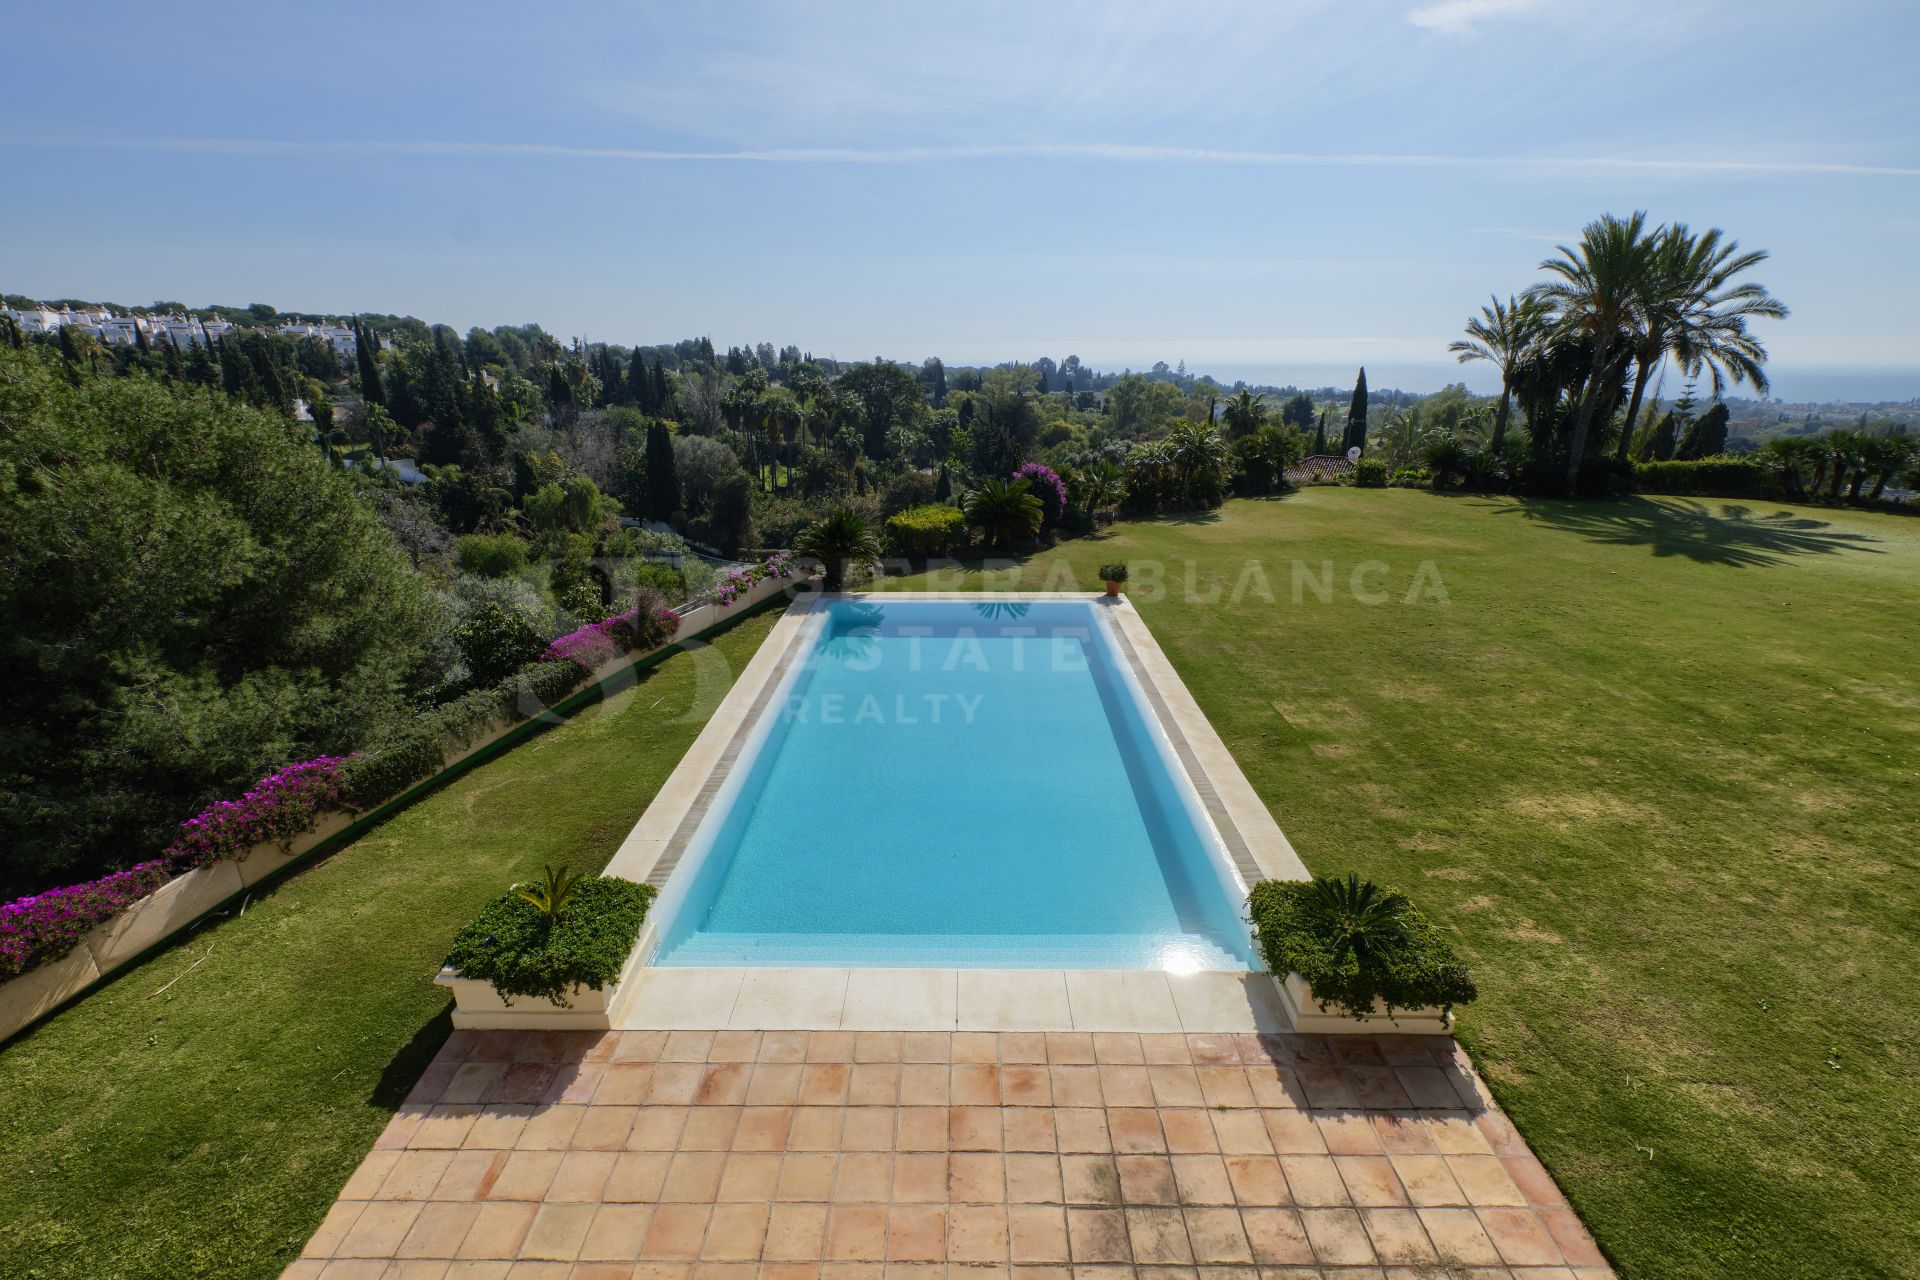 STANING ANDALUCIAN STYLE VILLA IN MARBELLA HILL CLUB